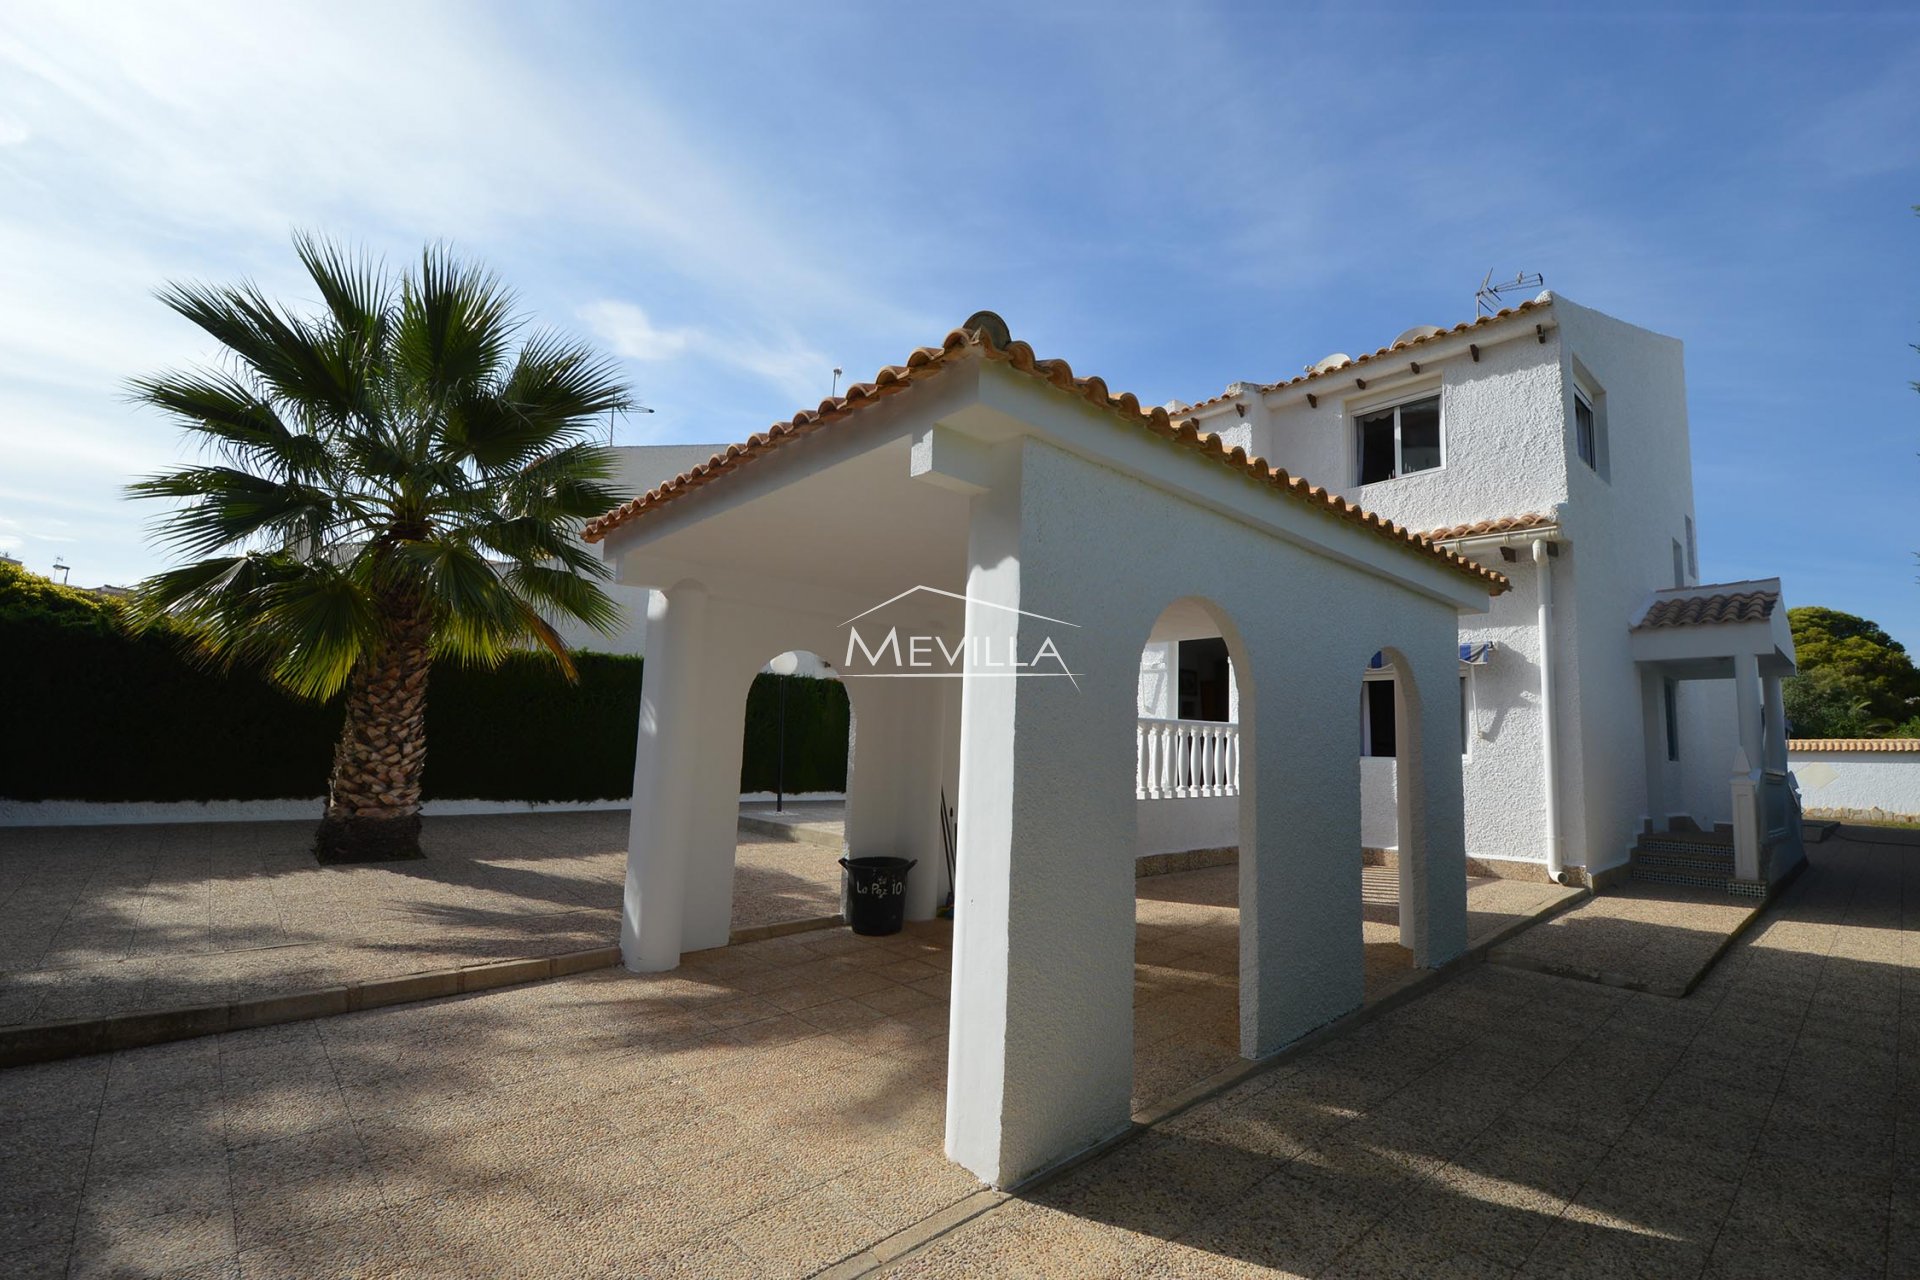 LOVELY AND SPACIOUS VILLA IN LA ZENIA LOVELY AND SPACIOUS VILLA IN LA ZENIA